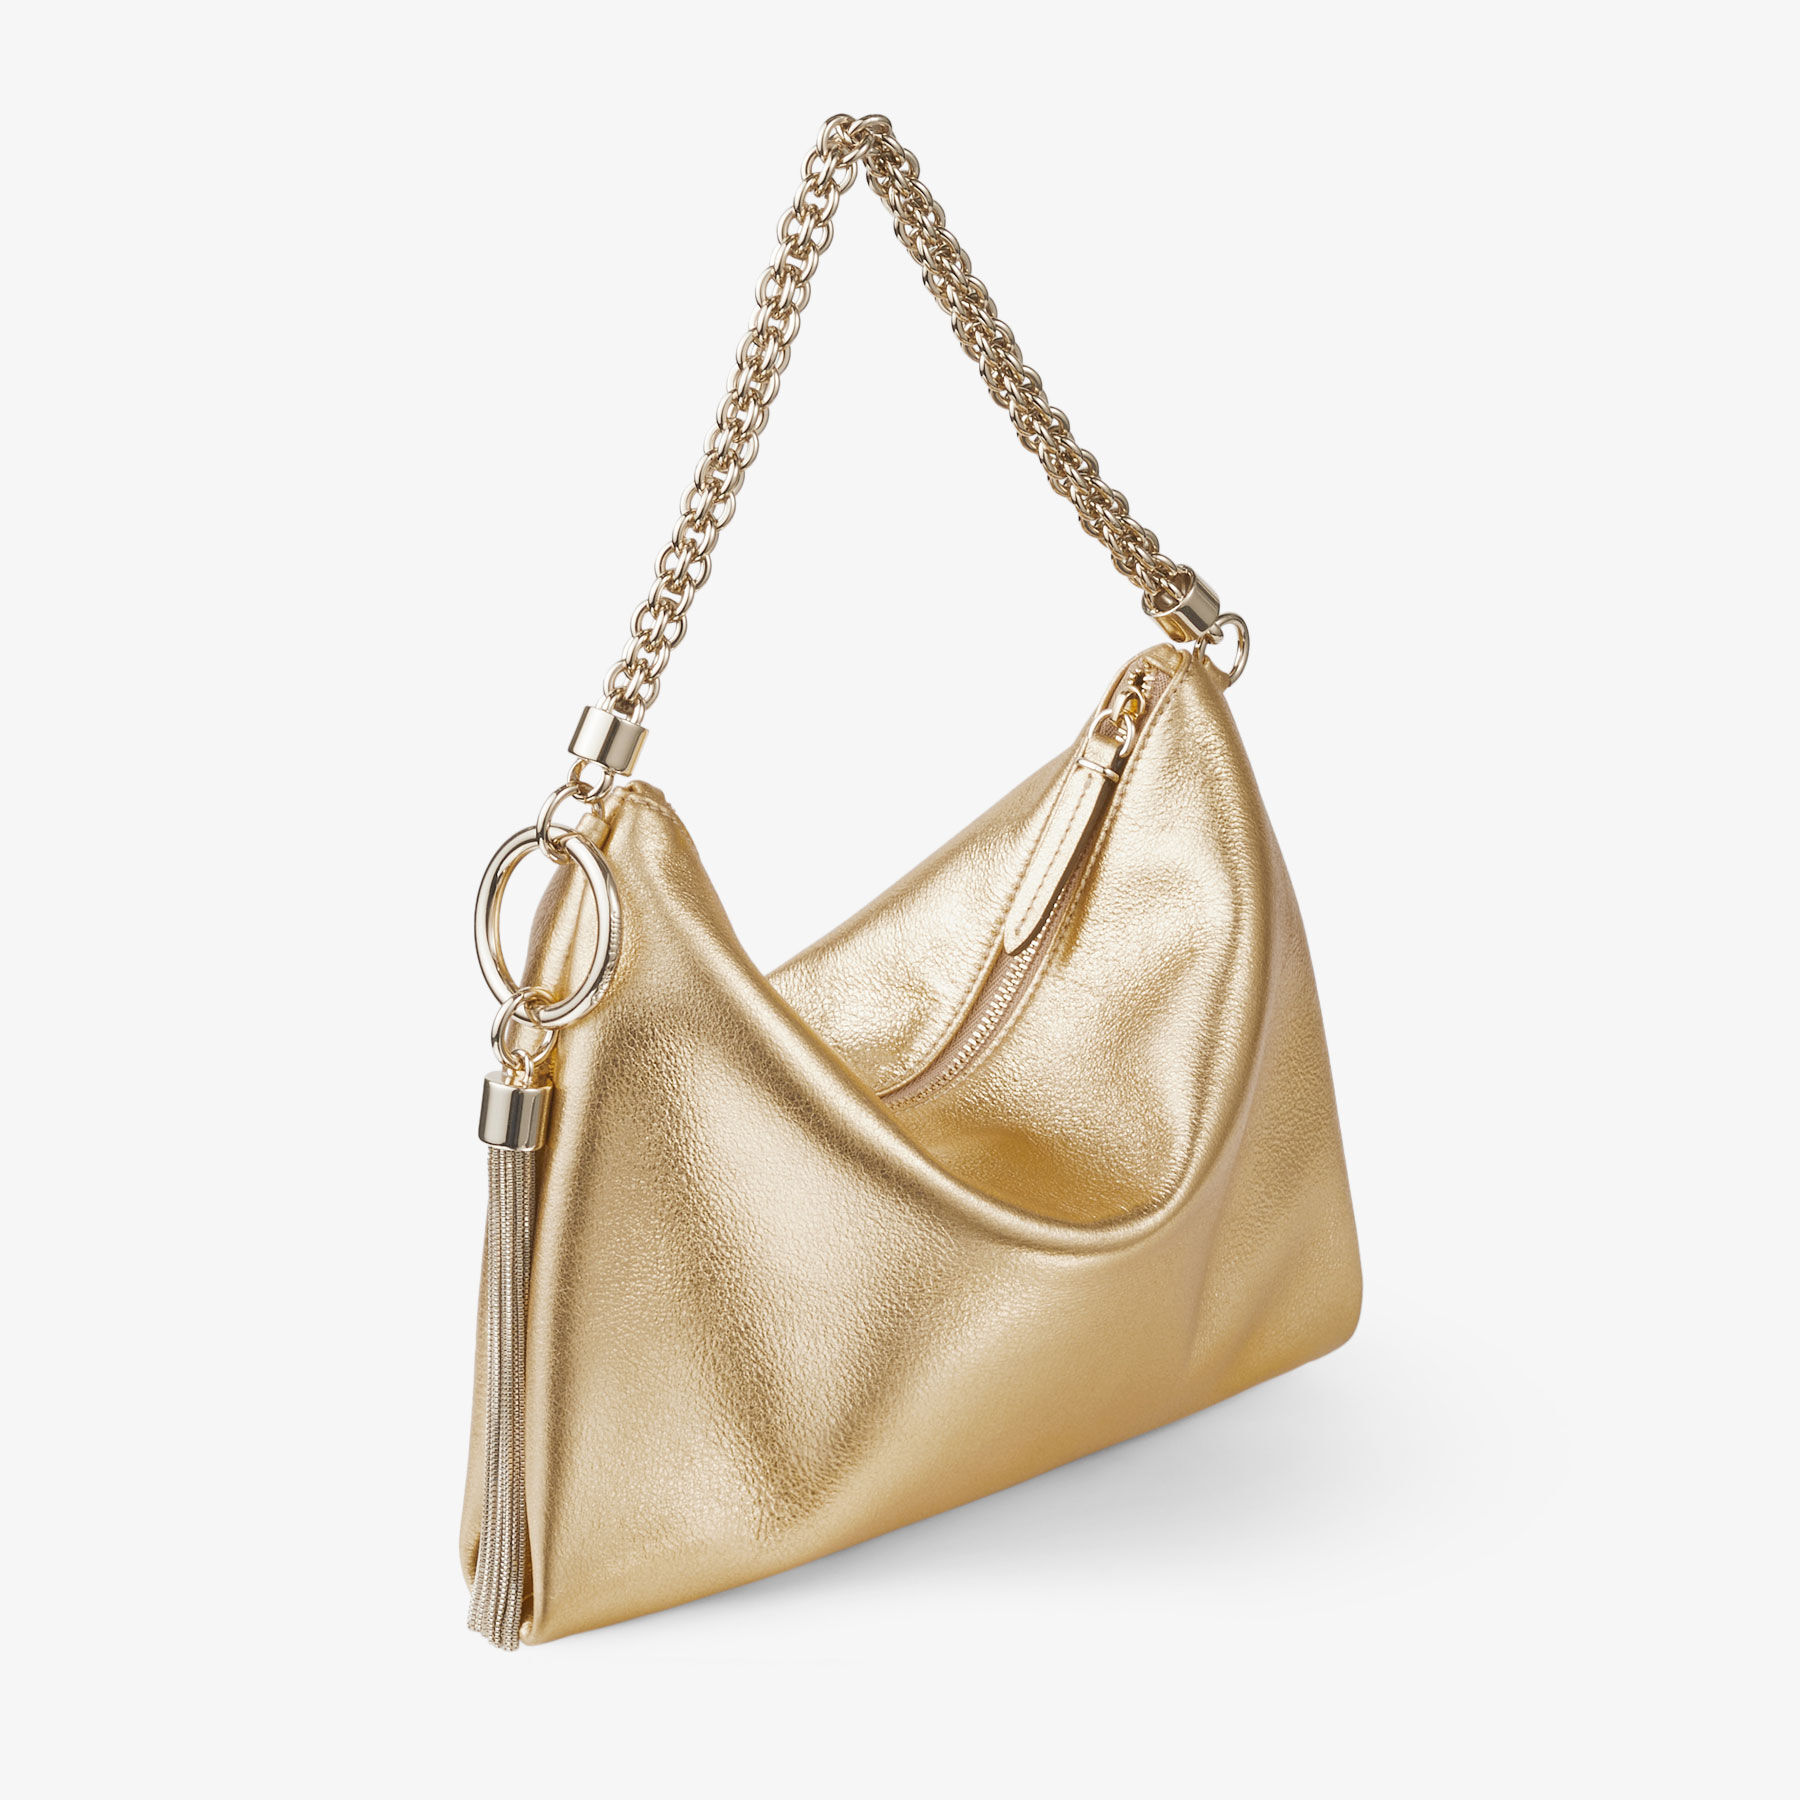 Gold Metallic Leather Clutch Bag With Chain Strap | CALLIE | Pre-Fall ...